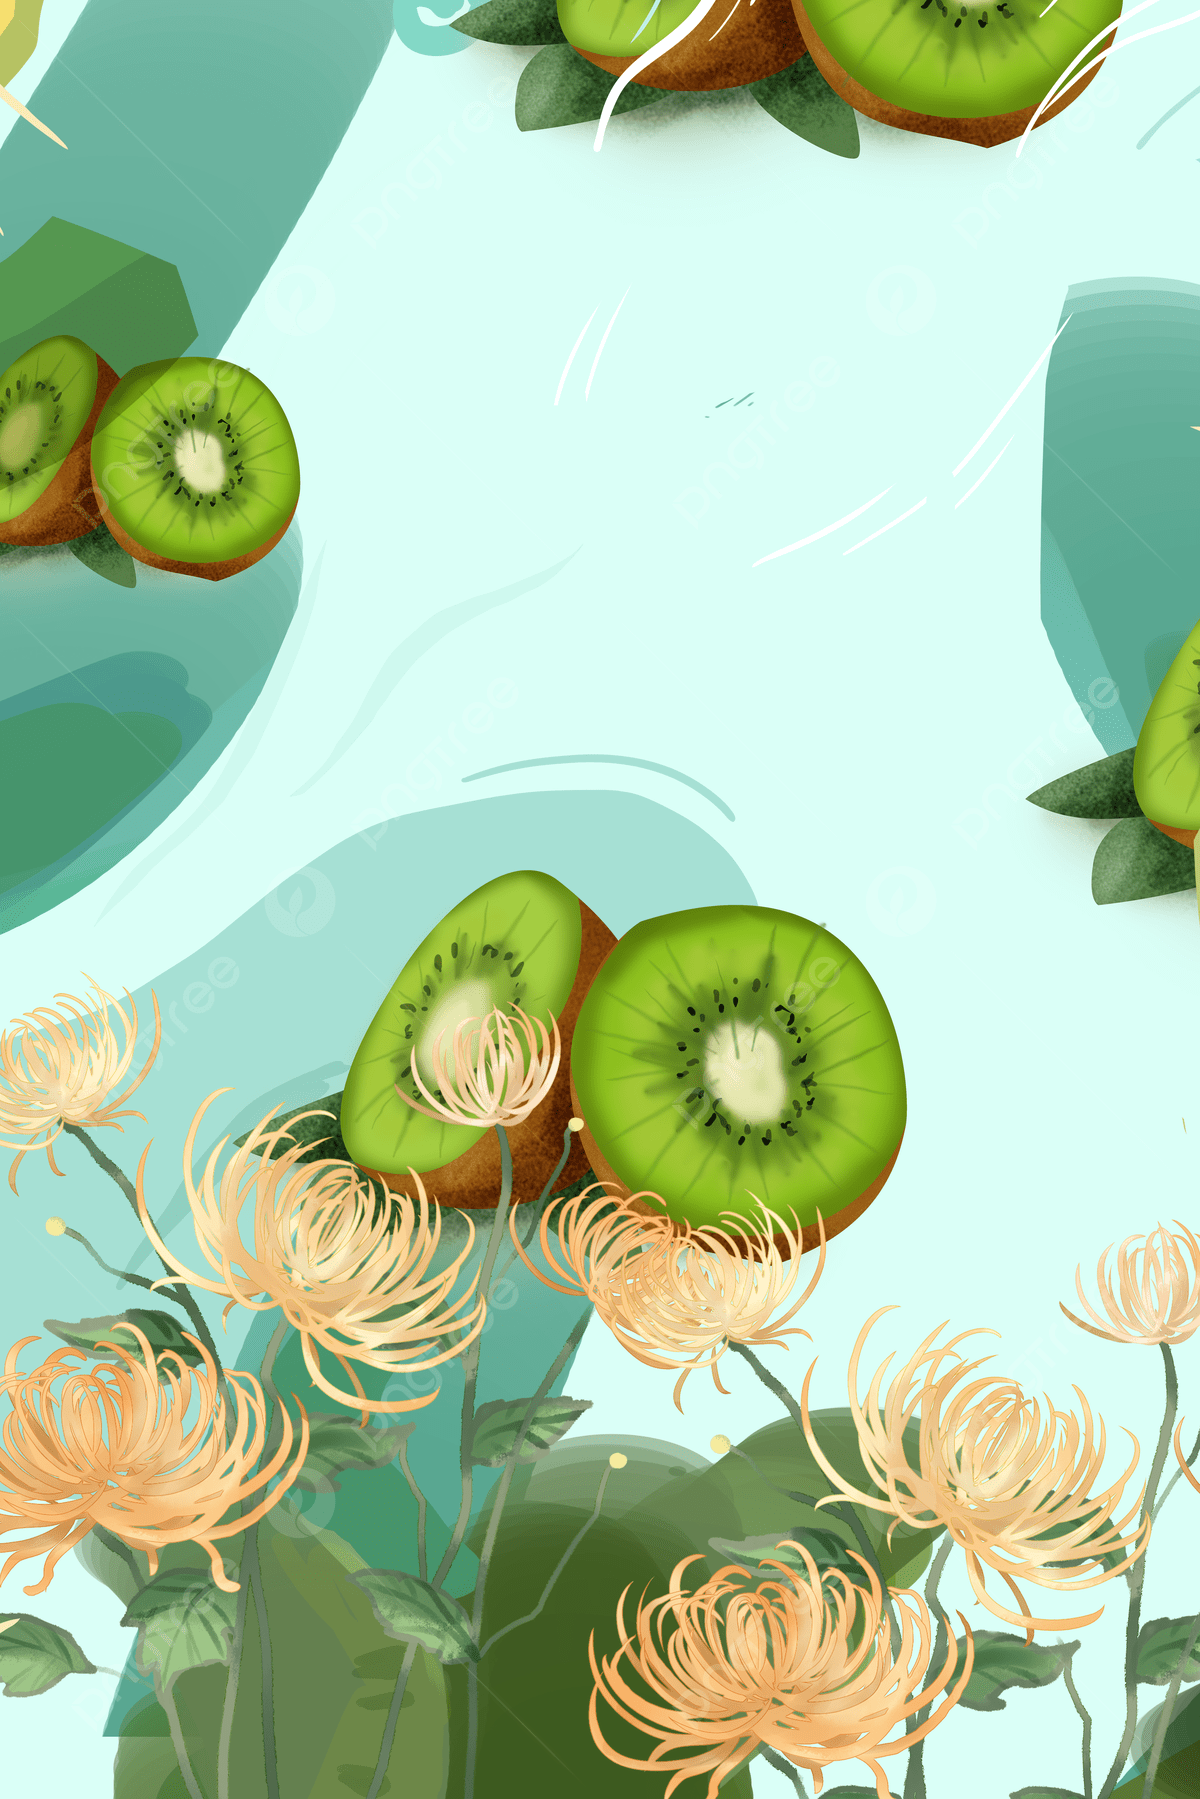 Kiwi Fruit Background Picture Wallpaper Image For Free Download